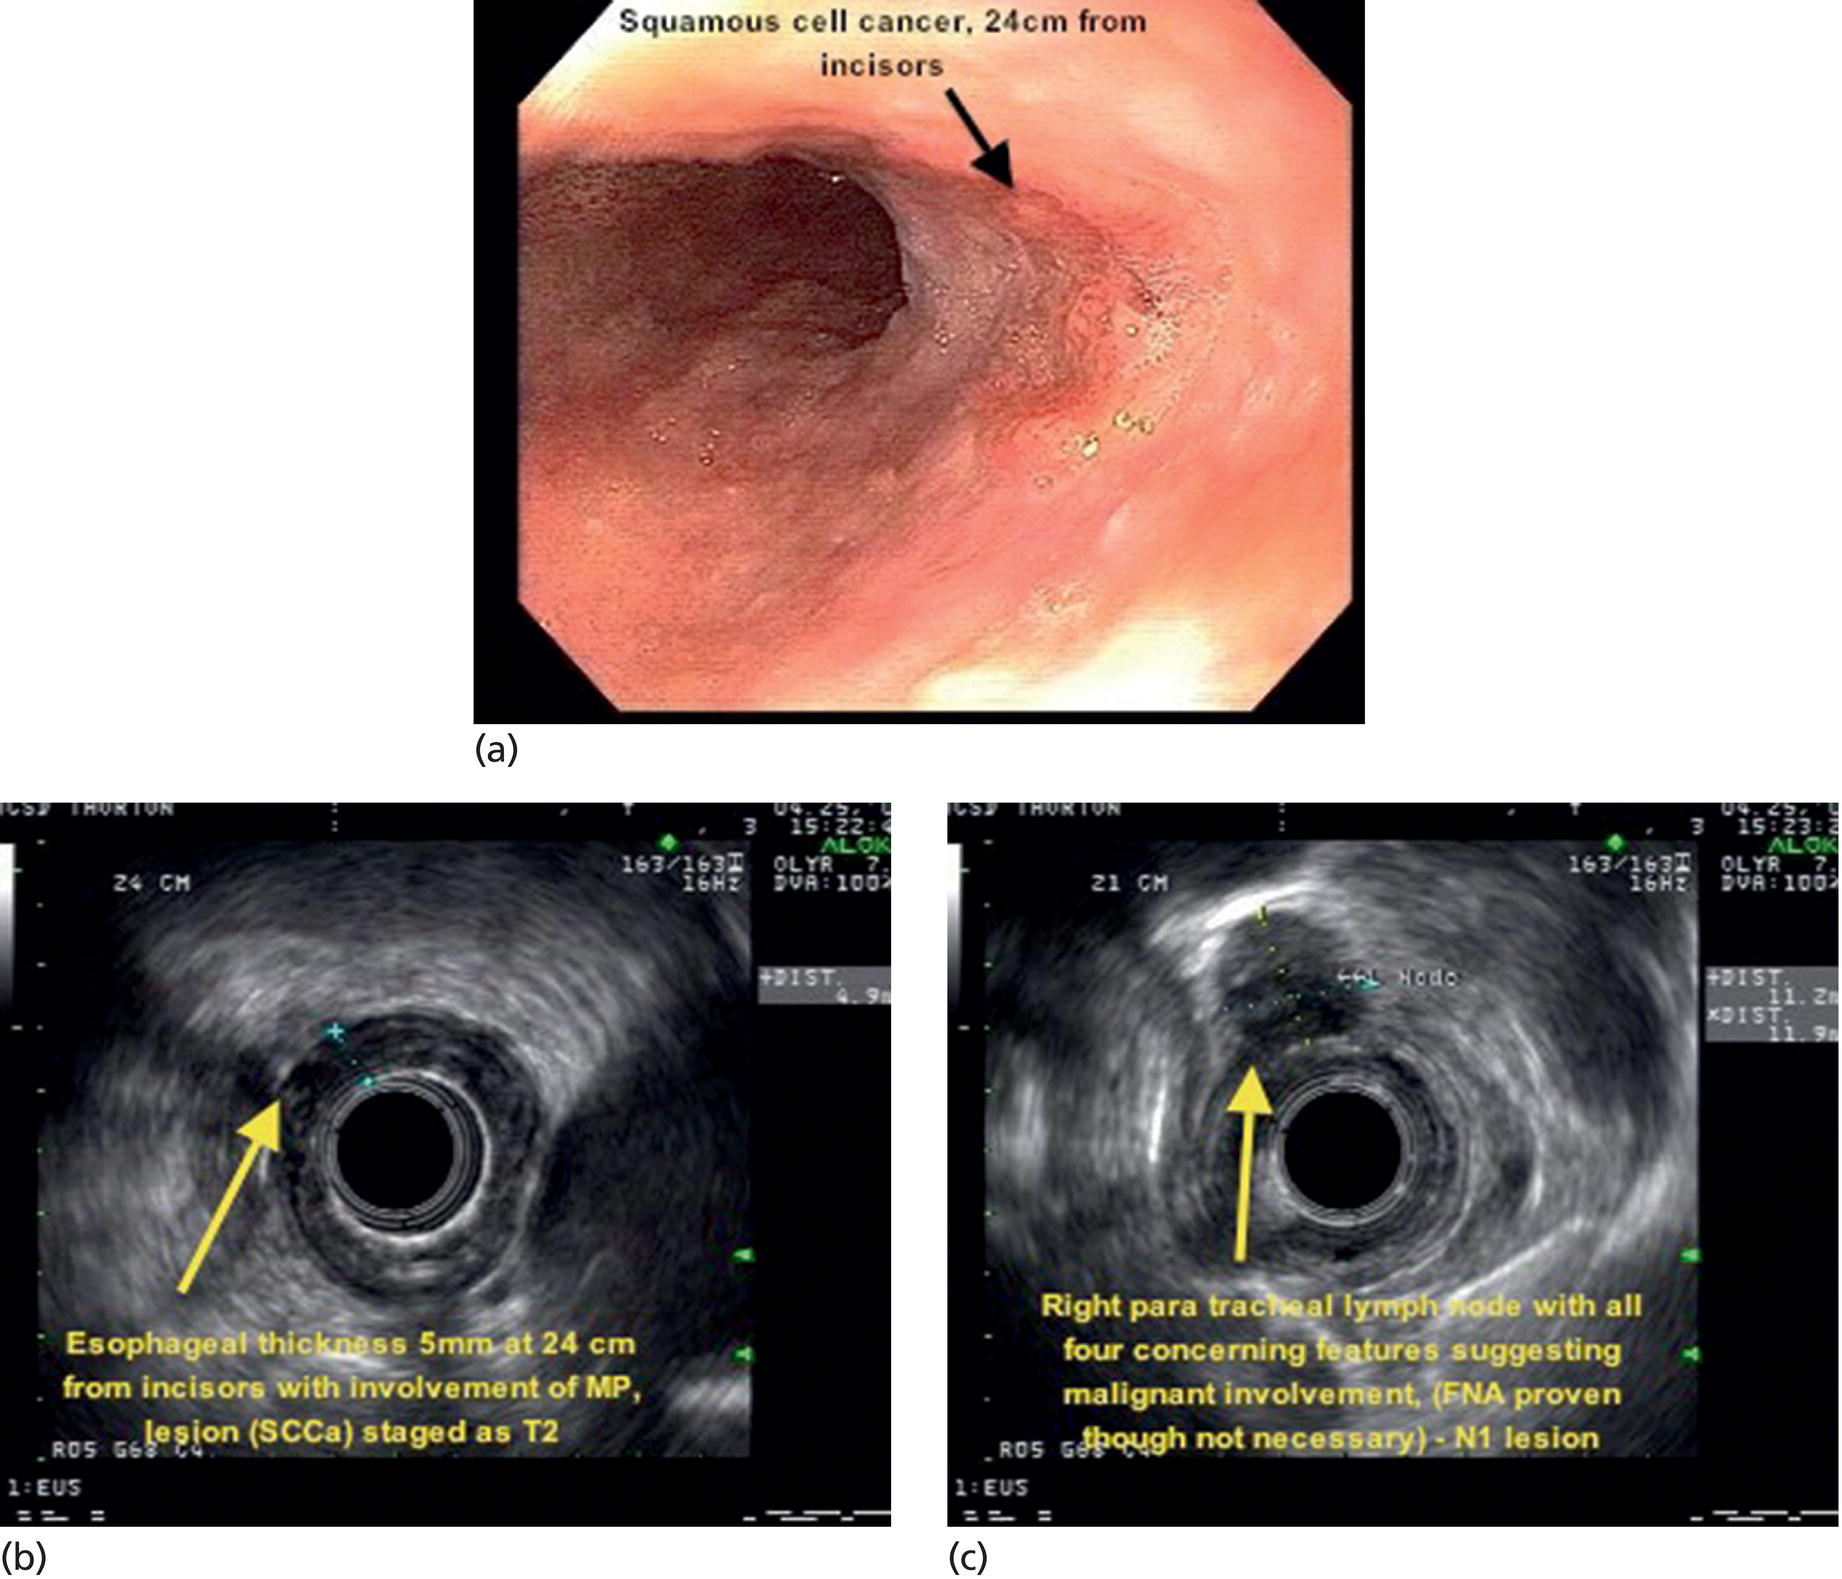 Photos depict (a) T2N1Mx lesion, squamous cell cancer with ulceration 24 cm from incisors shown by yellow arrow. (b) EUS image showing invasion of muscularis propria (MP) but not through the MP, shown by arrow. (c) Malignant-appearing paratracheal lymph node also observed and marked by arrow.